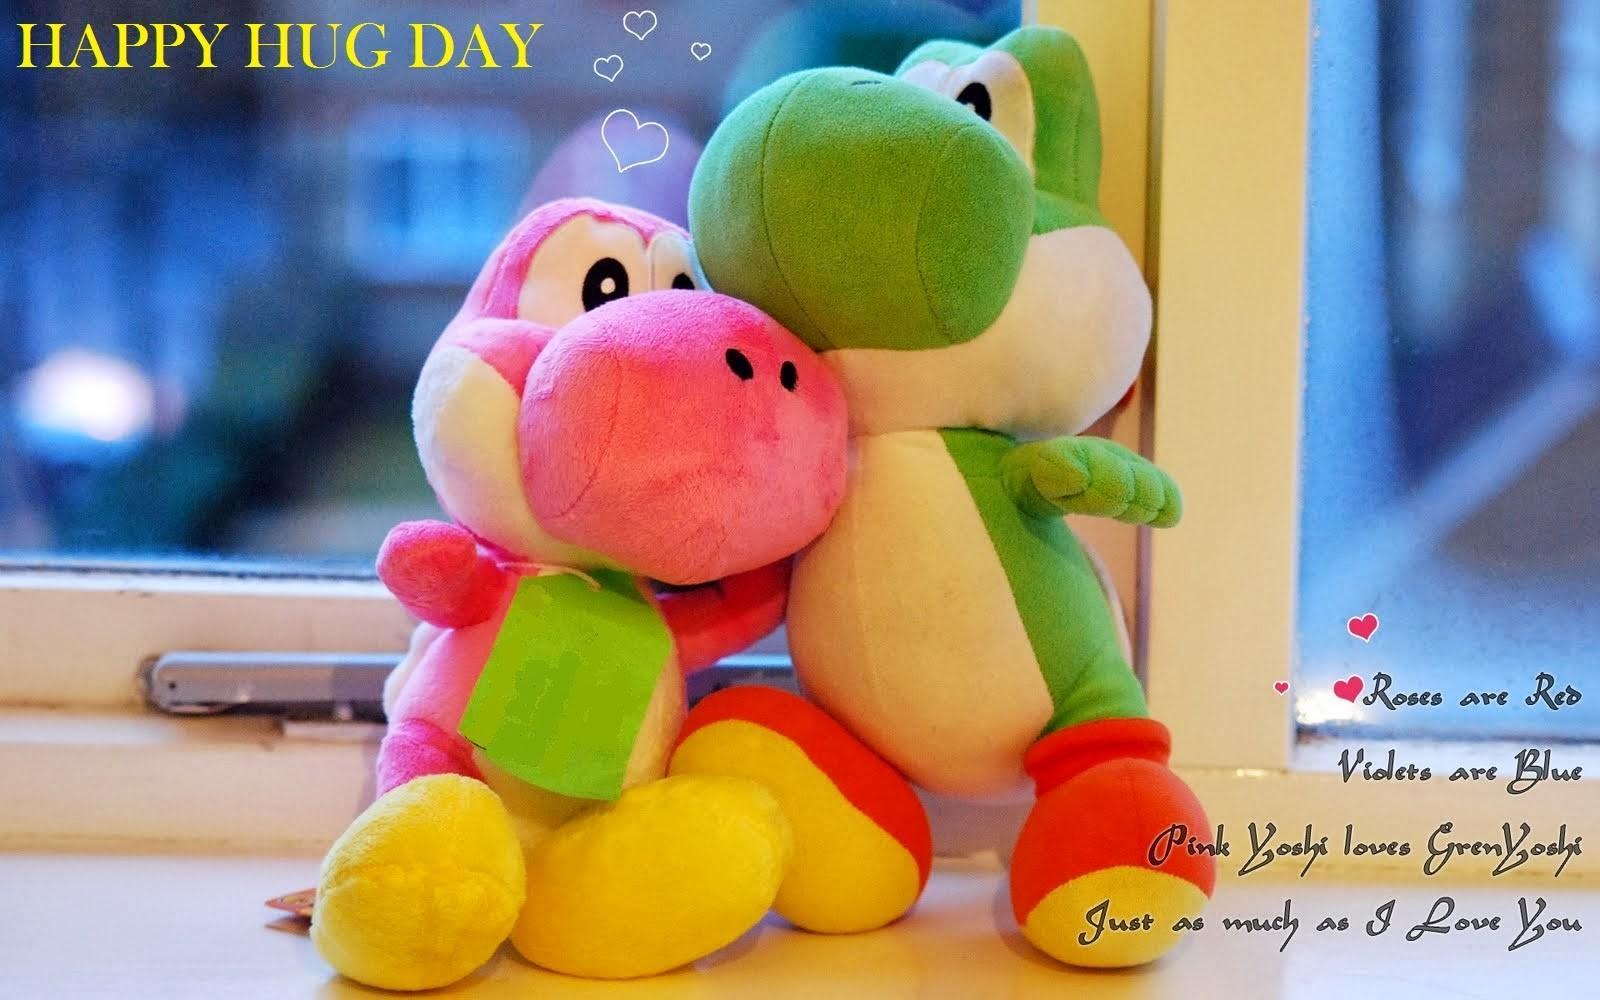 Happy Hug Day Image for Android